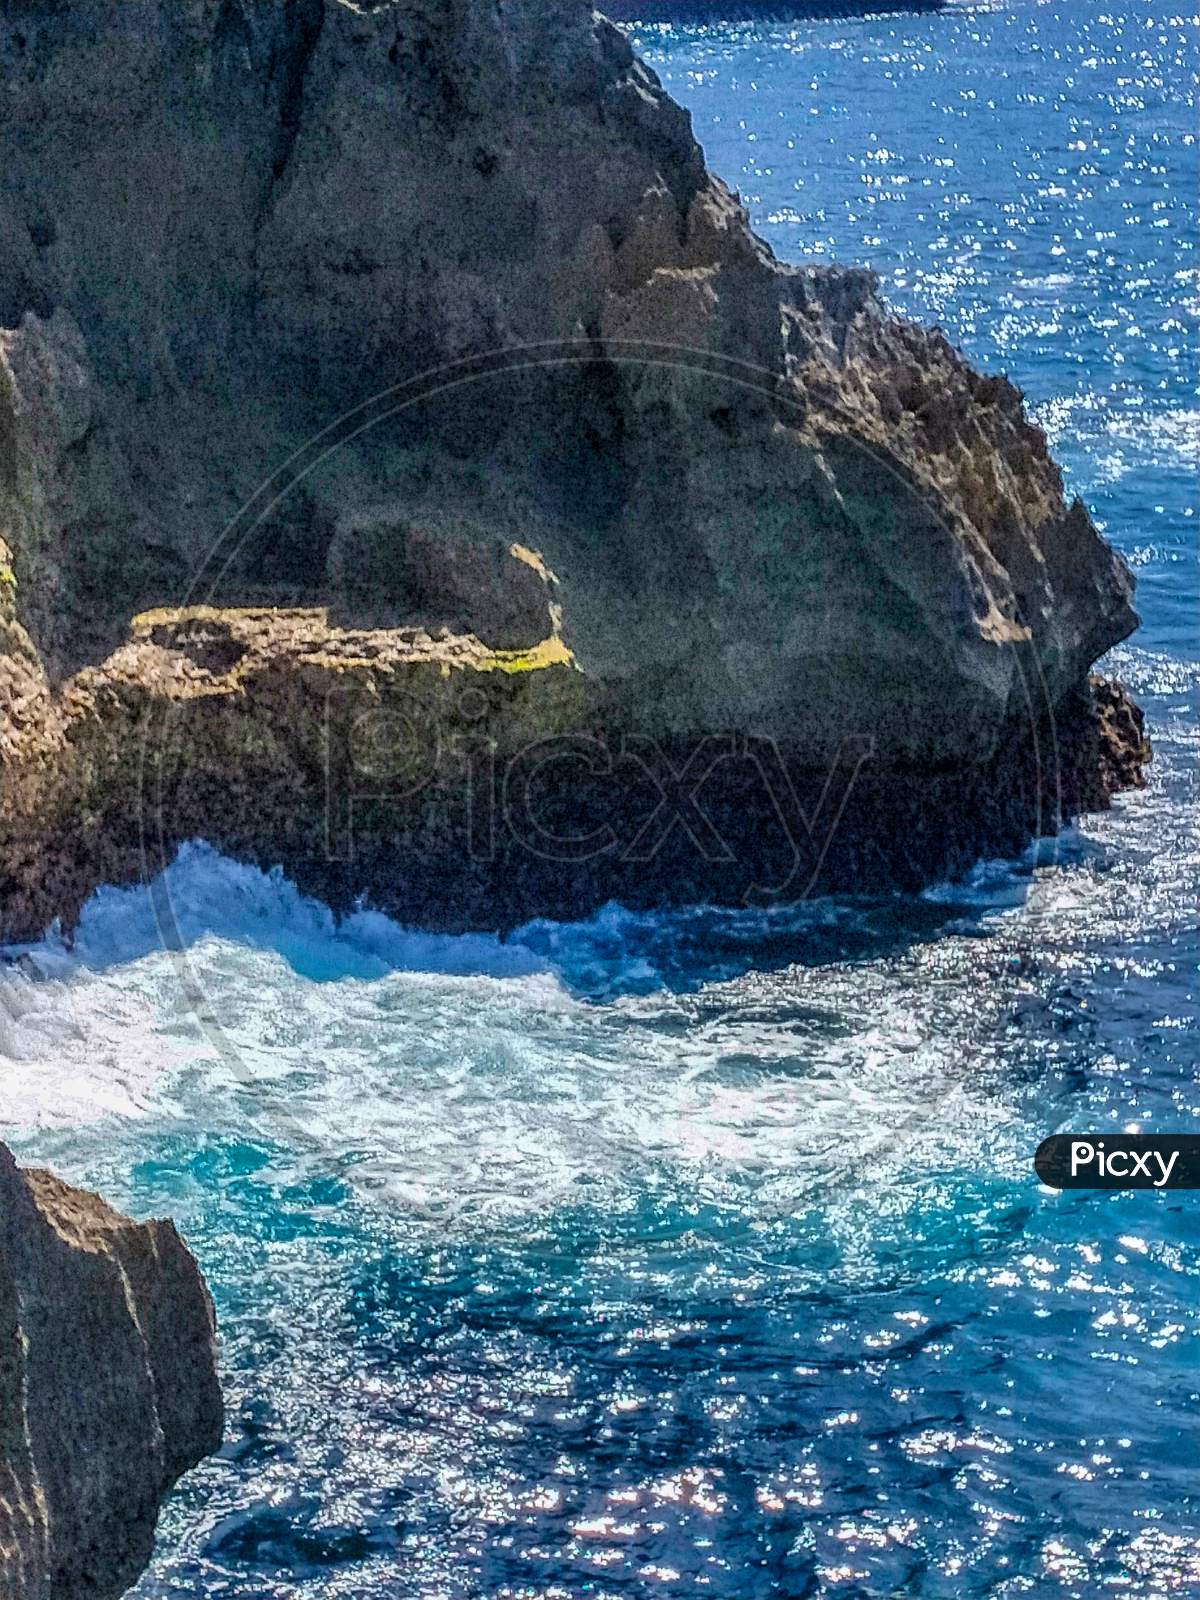 Beautiful Angel'S Billabong View. Sharp Dramatic Rocks And Crashing Waves At The Entrance To Angel'S Billabong On Nusa Penida, Wonderful Angels Billabong At Nusa Penida, Bali Indonesia, Angel'S Billabong Is Natural Infinity Pool On The Island